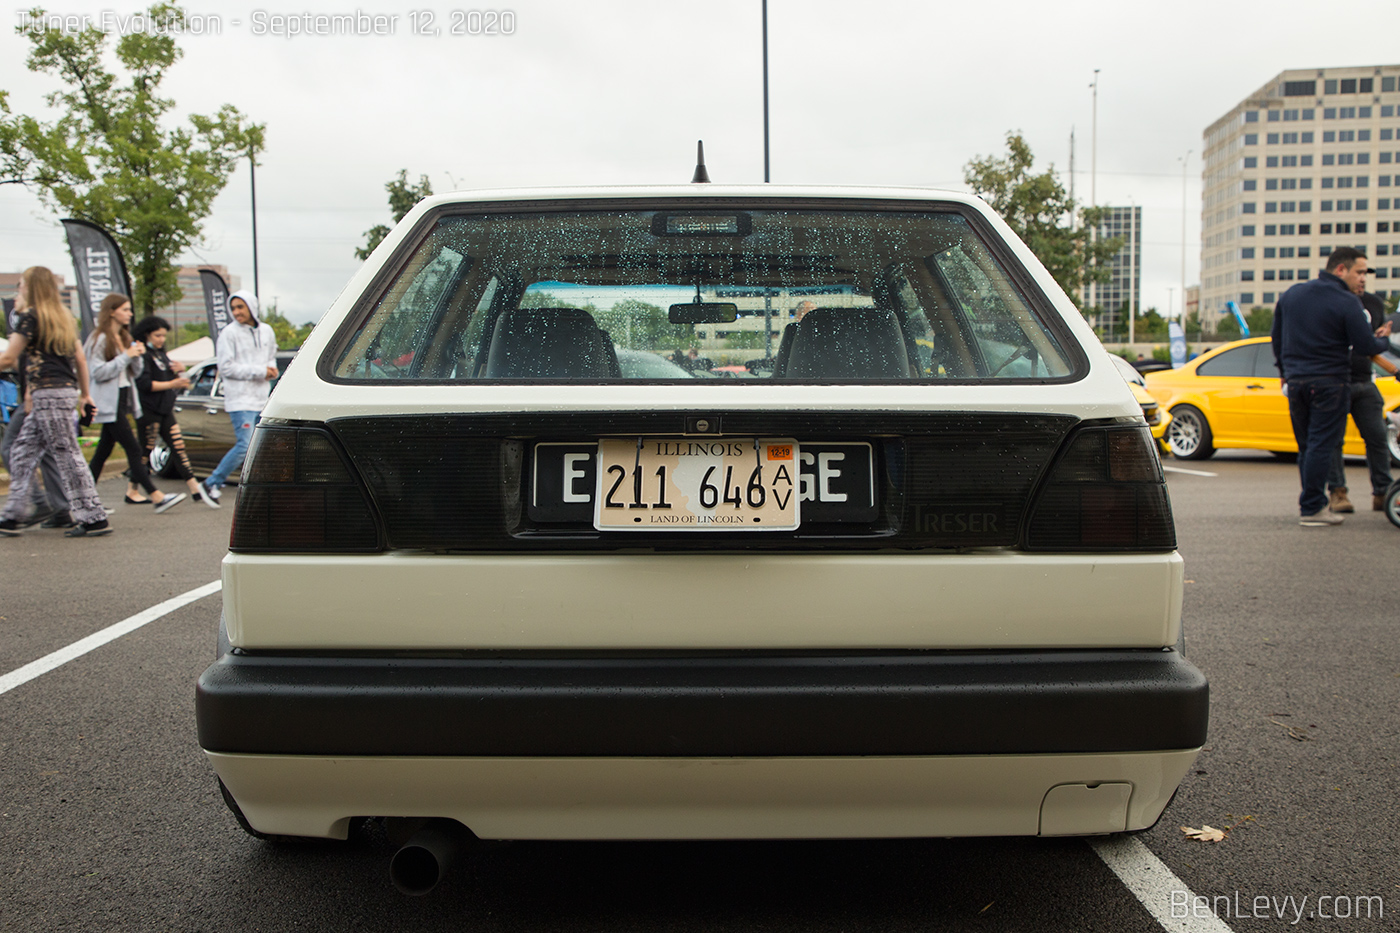 MK2 Volkswagen GTI with Treser Rear Heckblende and Smoked Tails